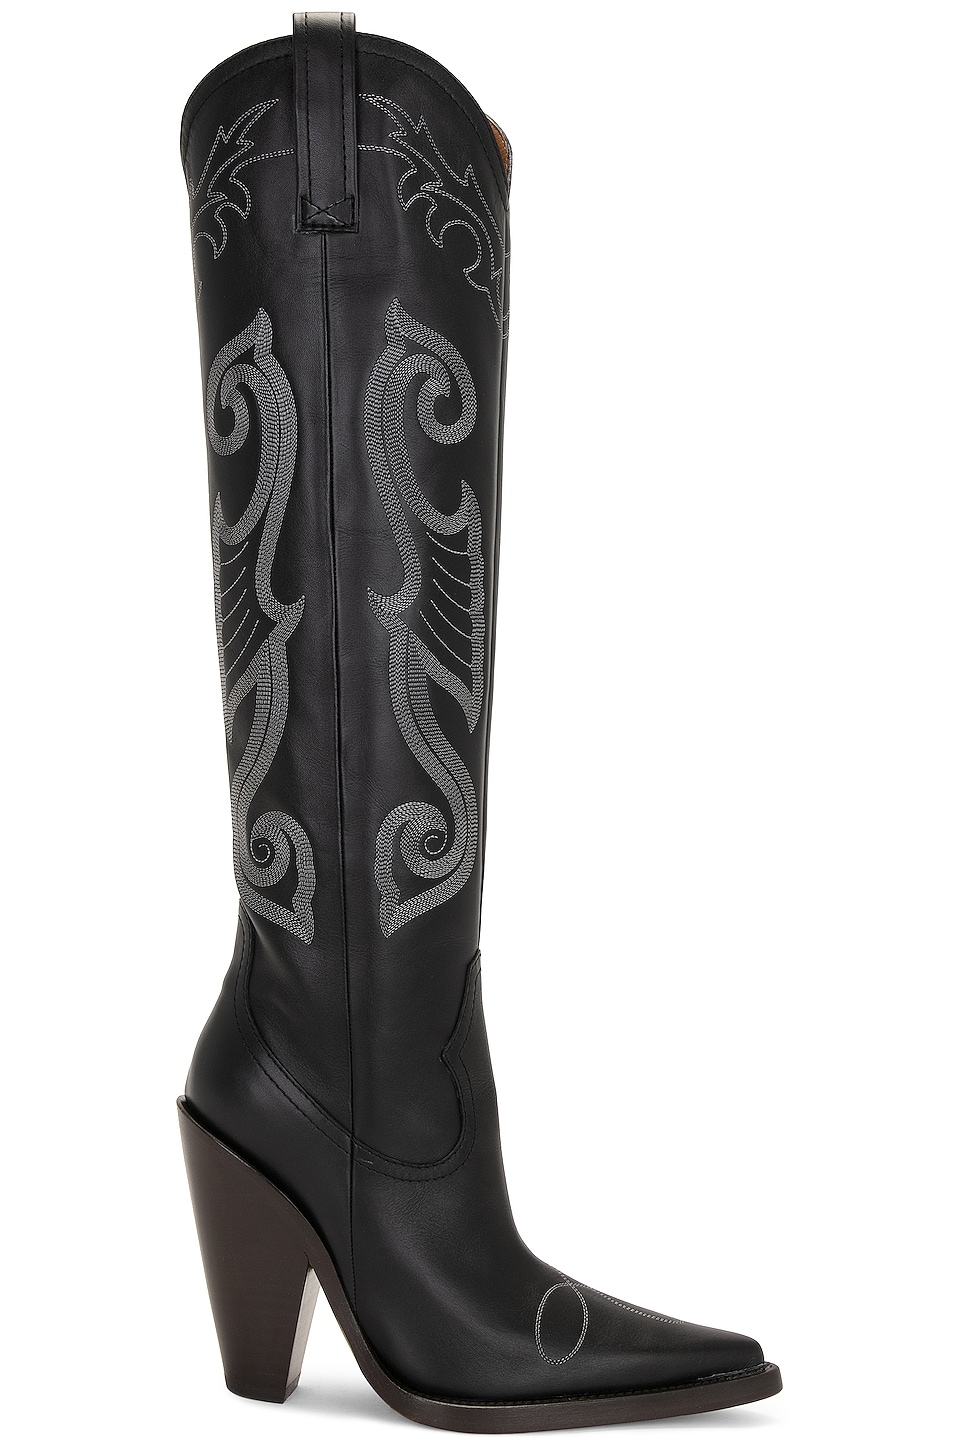 Image 1 of Moschino Jeans Knee High Boot in Fantasy Print Black